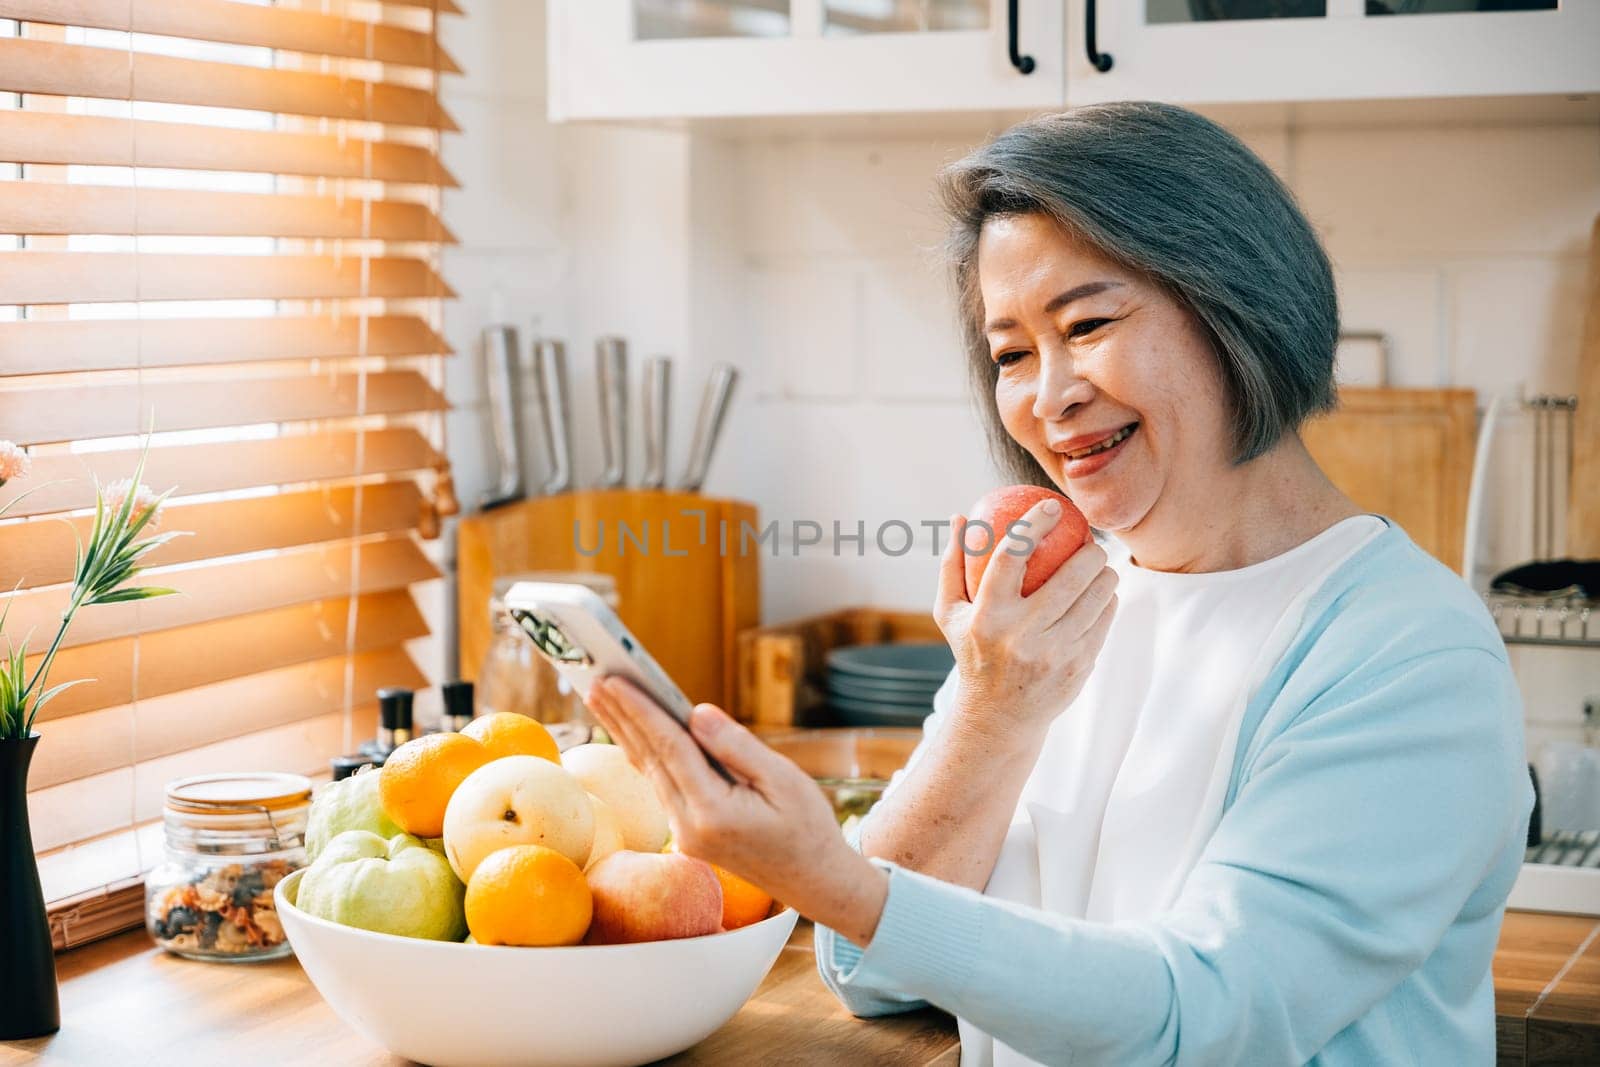 In the kitchen, an old woman, a grandmother, savors breakfast. She's smiling, using her smartphone, and munching on a red apple. A portrayal of technology, happiness, and care at home. by Sorapop